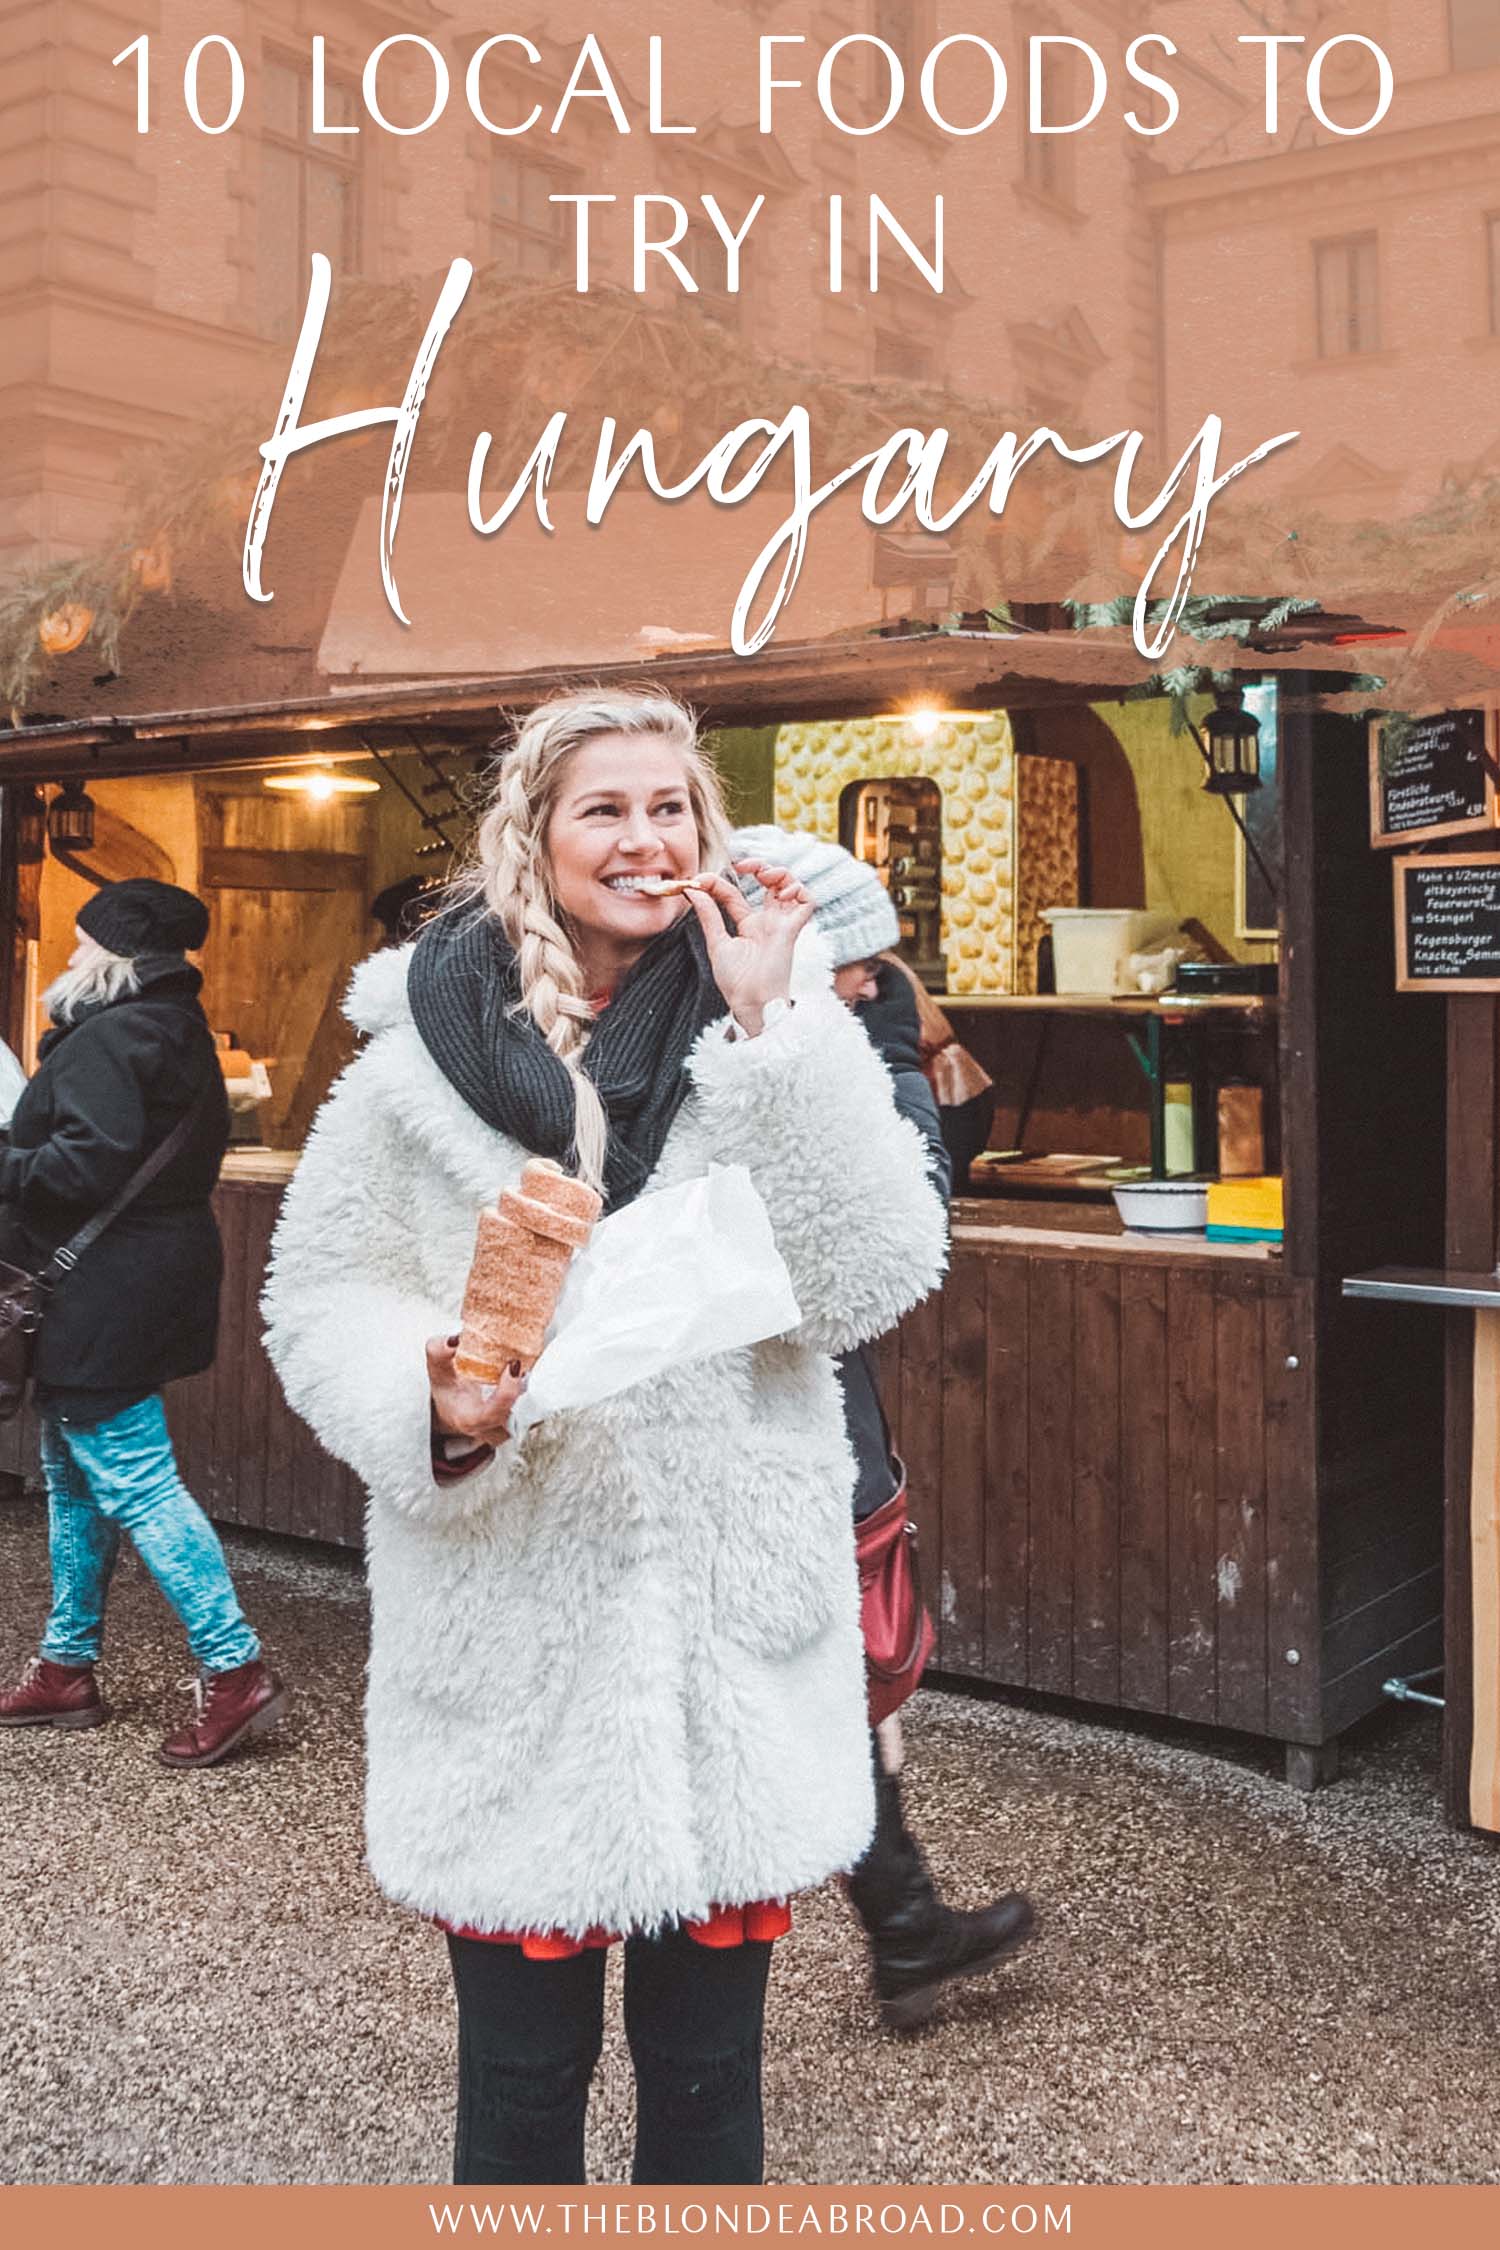 Local Foods Hungary header updated